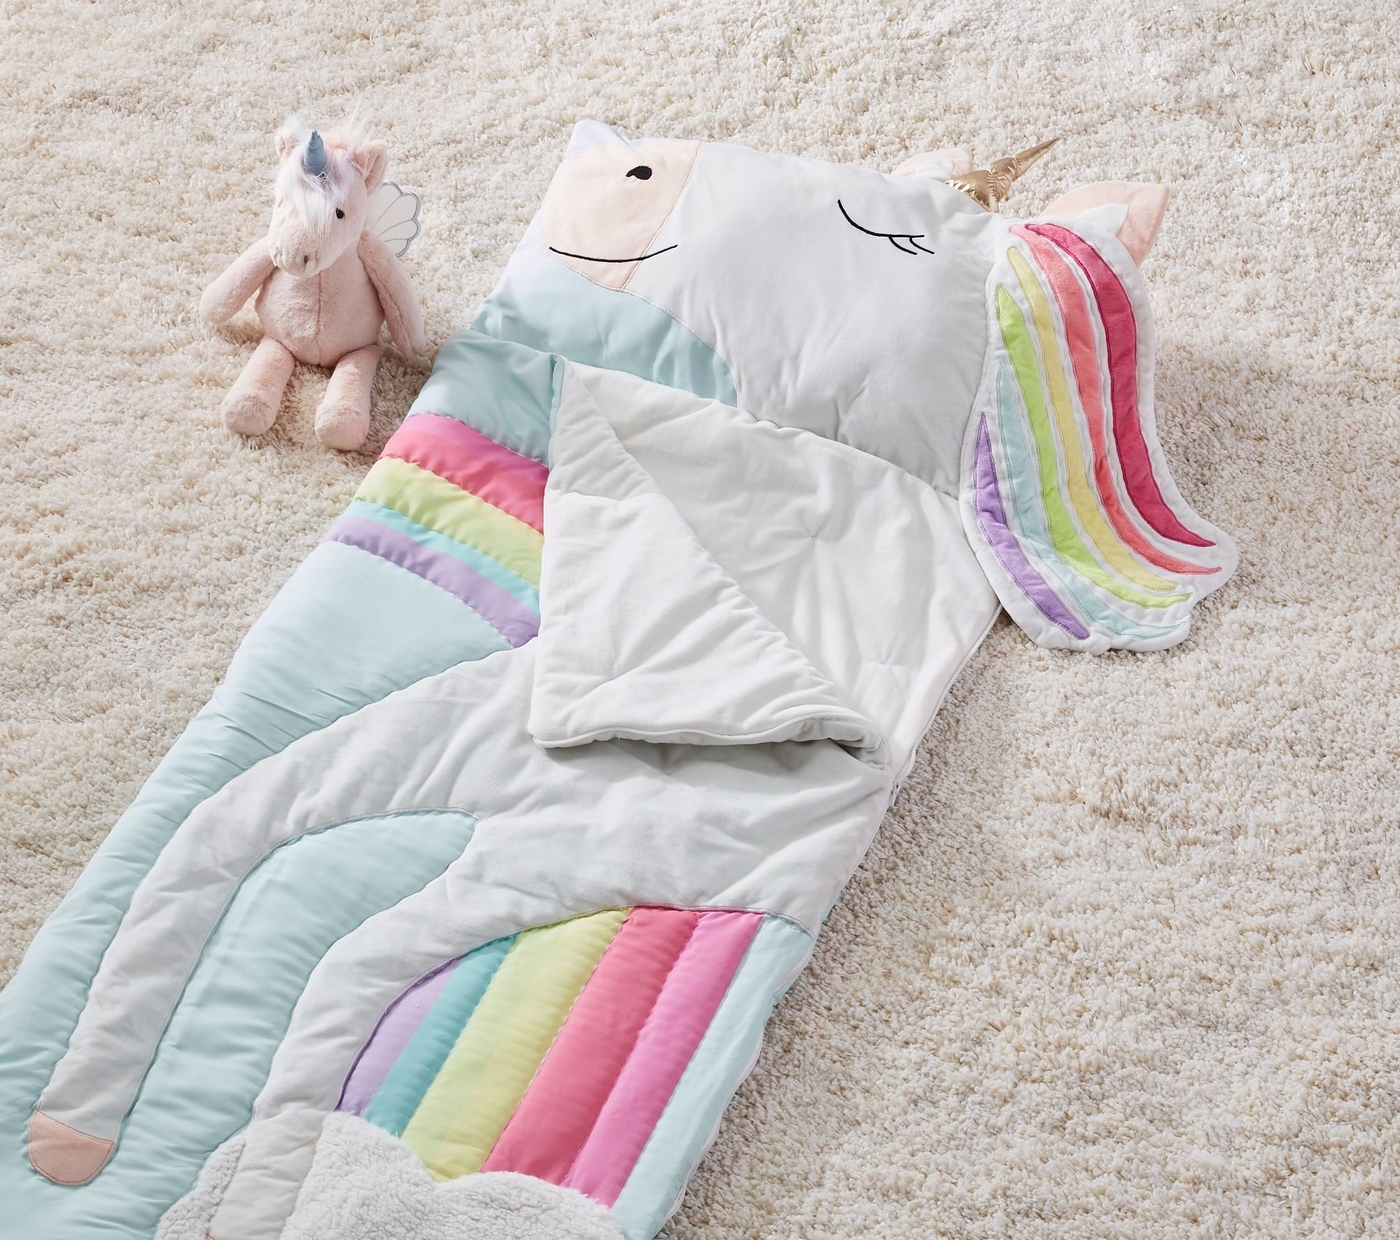 Sherpa Sleeping Bags from Pottery Barn Kids are Perfect Christmas Eve Gift   NYMetroParents